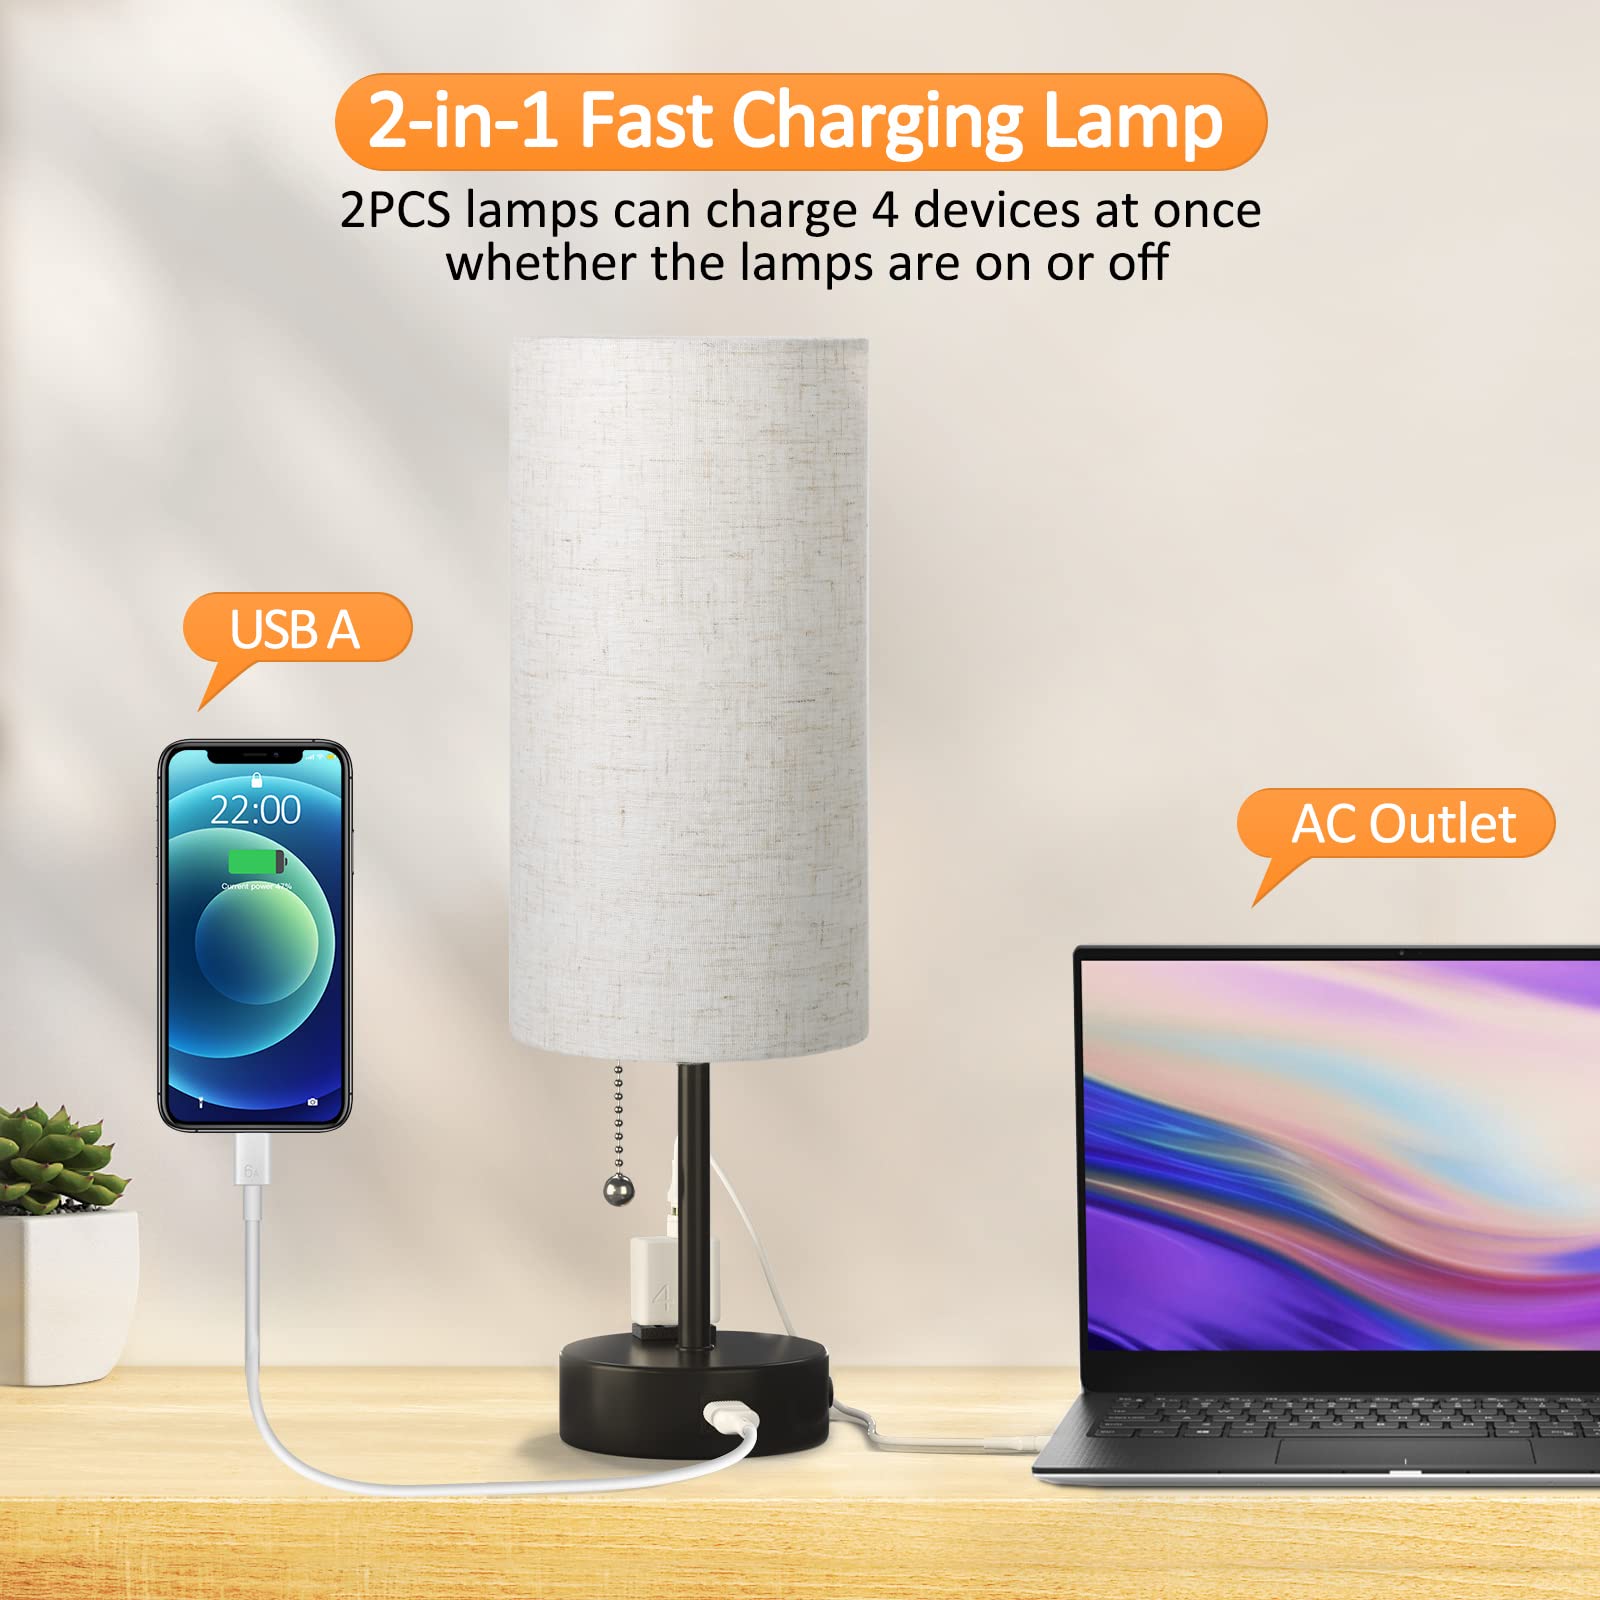 Small Bedside Table Lamp with 3 Color Temperatures, Kids Mini Bedside Lamp, Pull Chain Nightstand End Table Lamp with USB Port & AC Outlet for Bedroom Guestroom Livingroom Dorm, Beige, 1 Pack